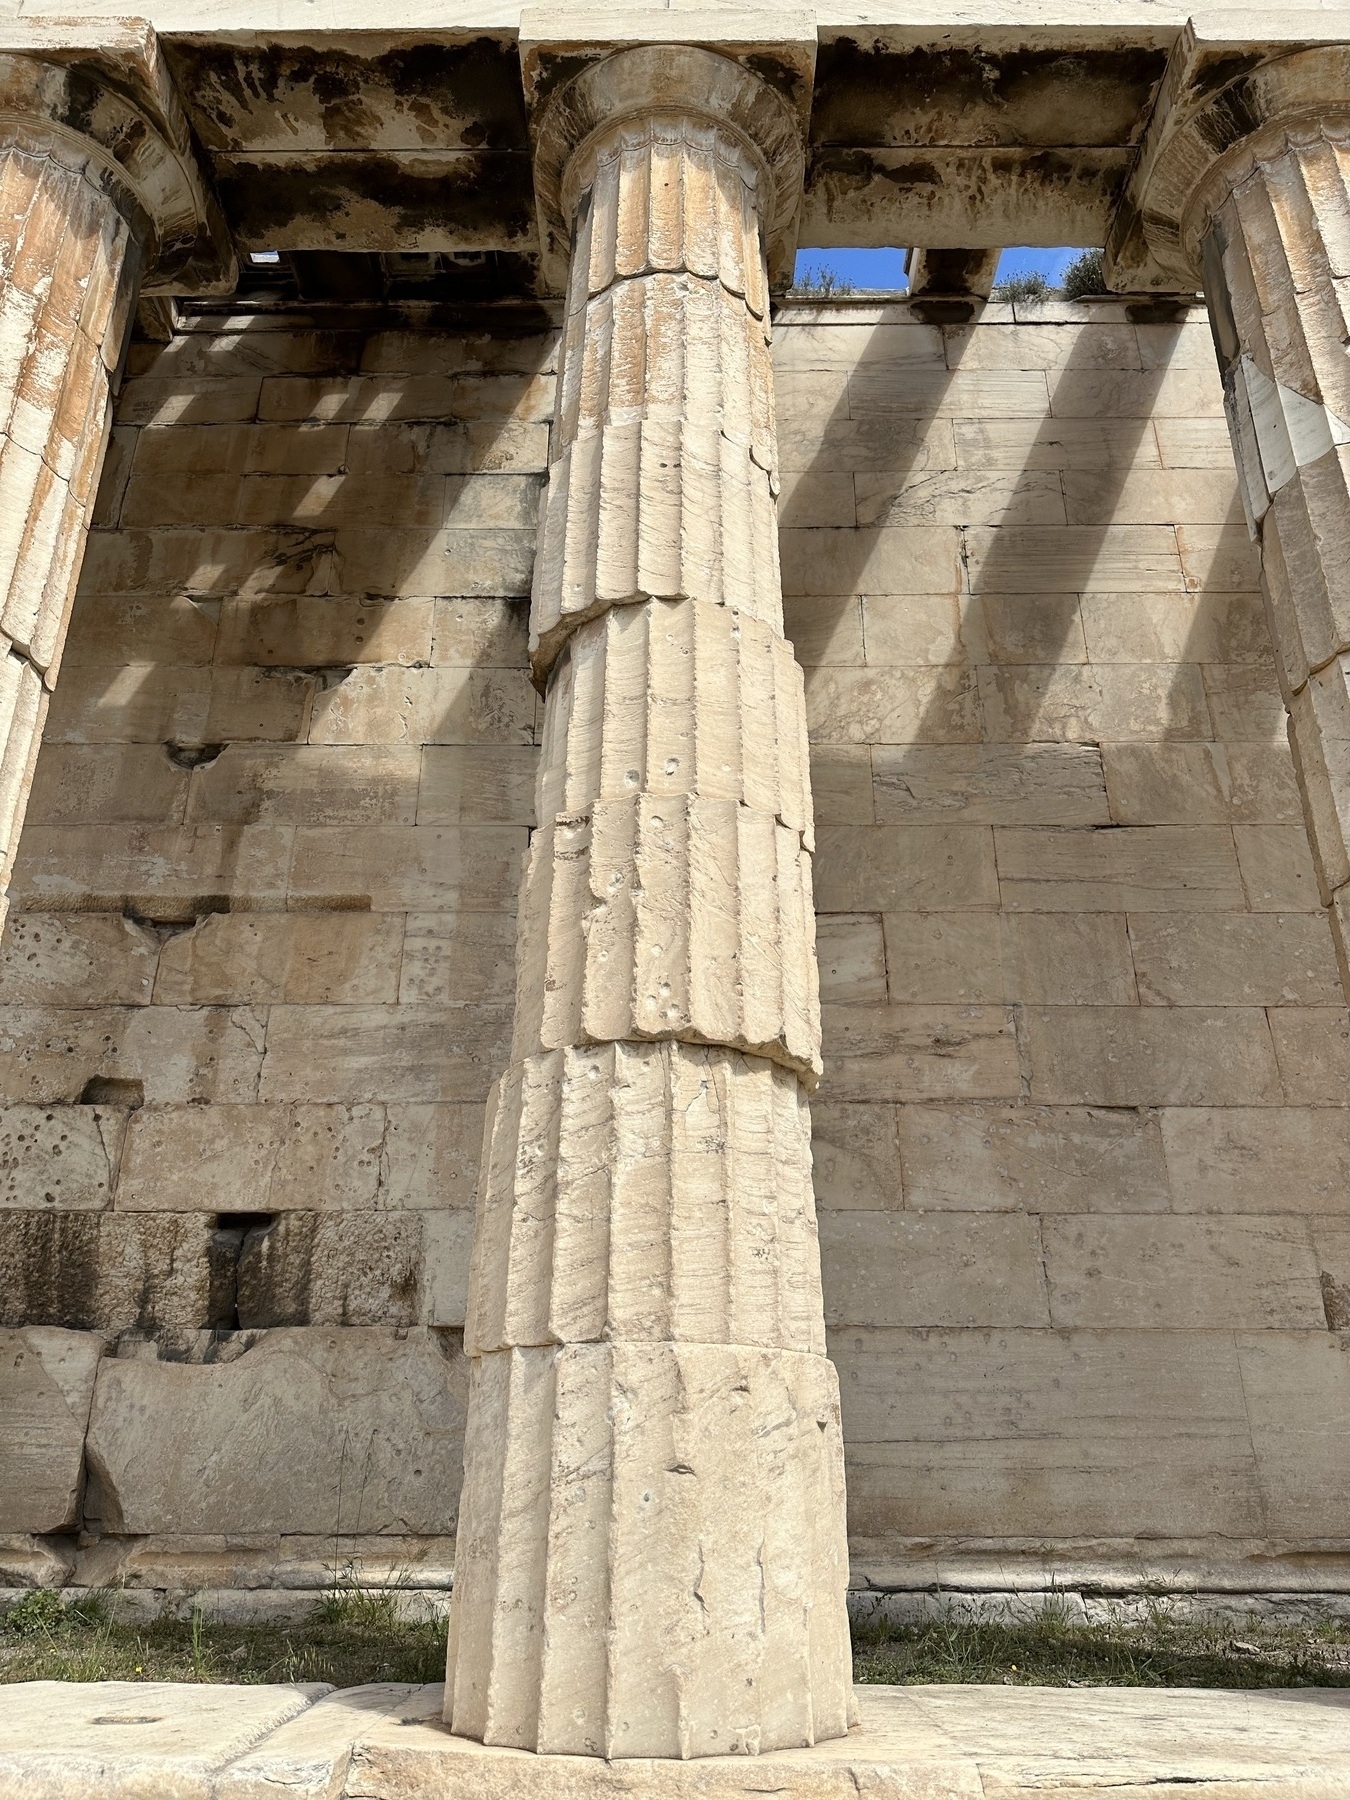 A Doric column made up of seven sections, each offset horizontally from each other, making it look slightly unstable.